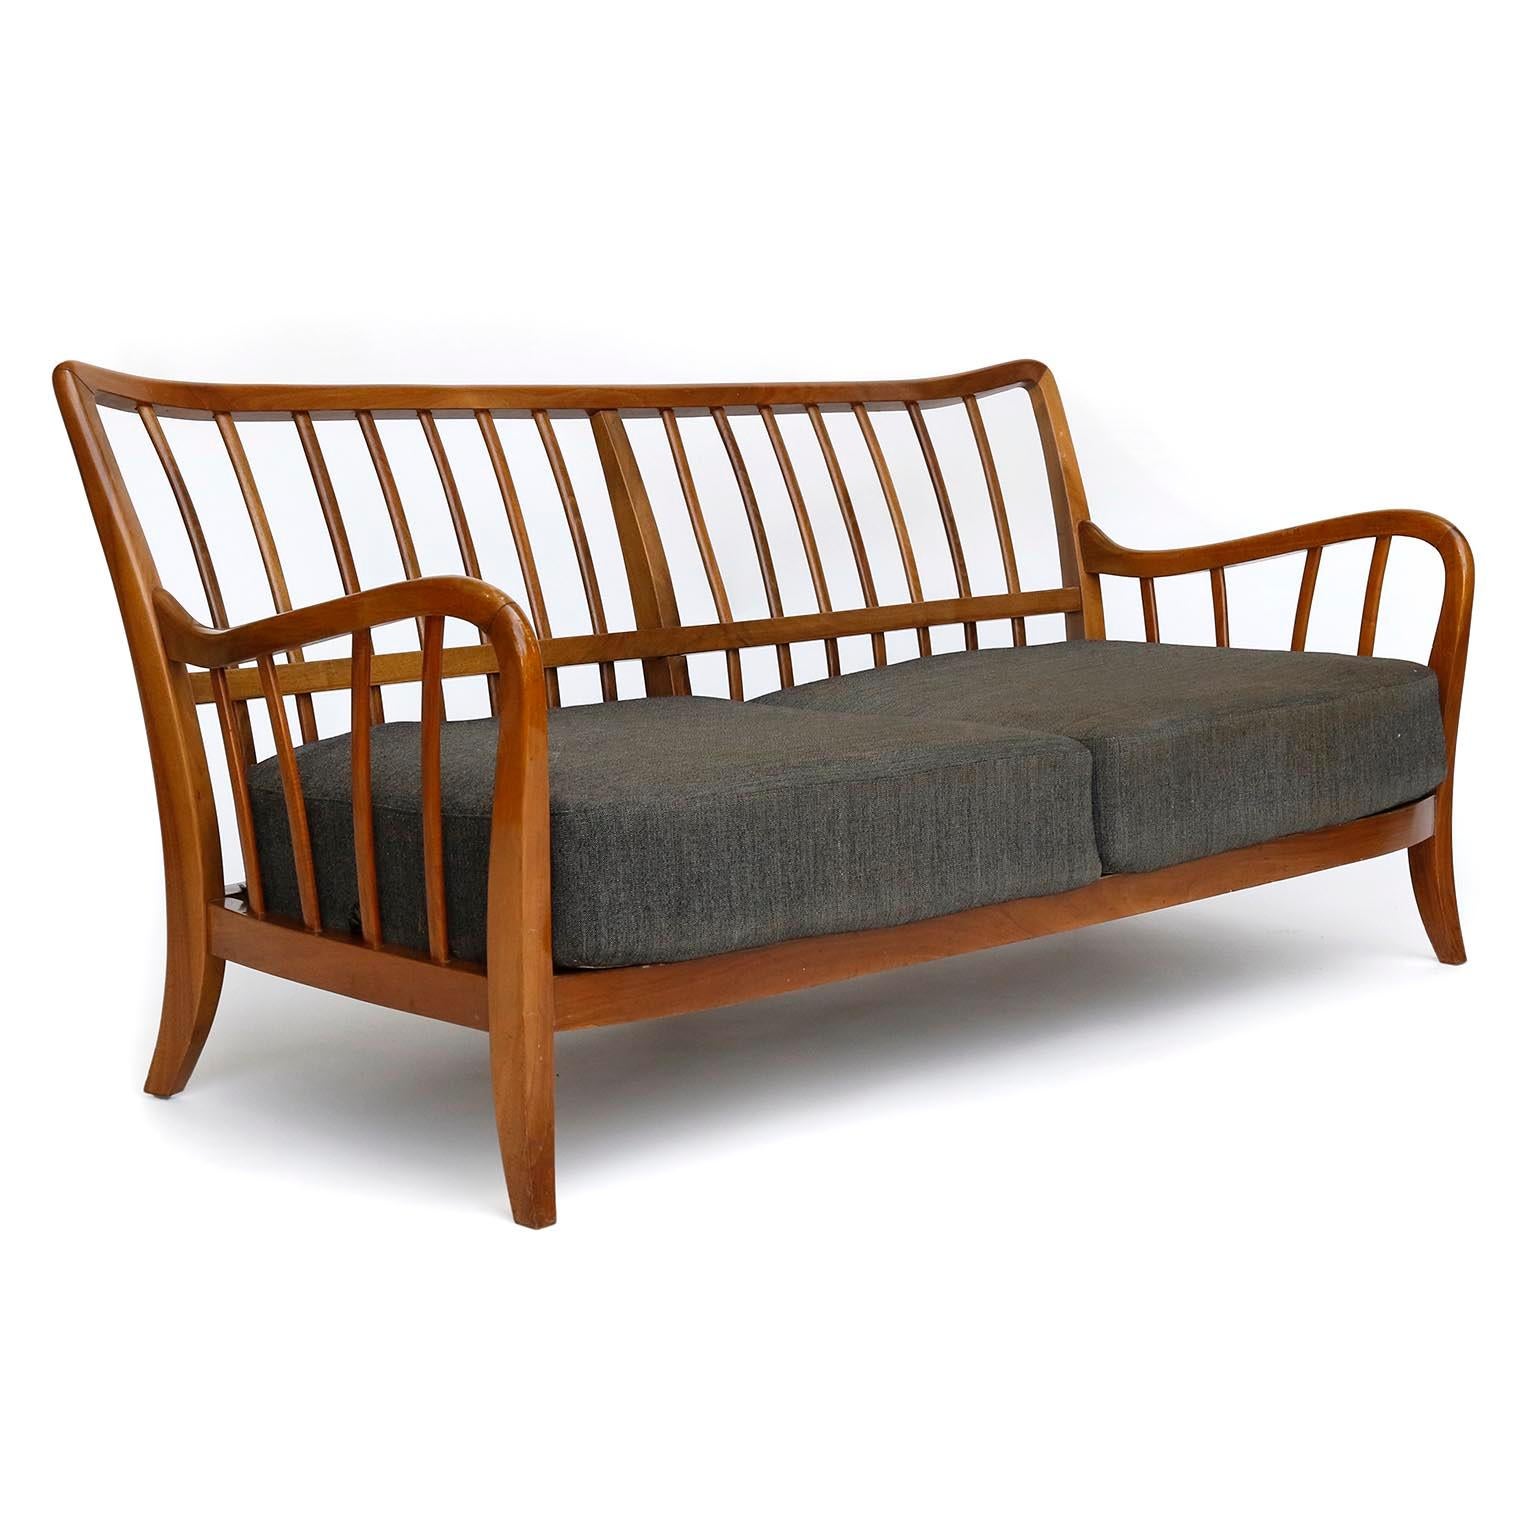 Fabric Seette Bench Seat Attributed to Josef Frank, Walnut Wood, Thonet, 1940